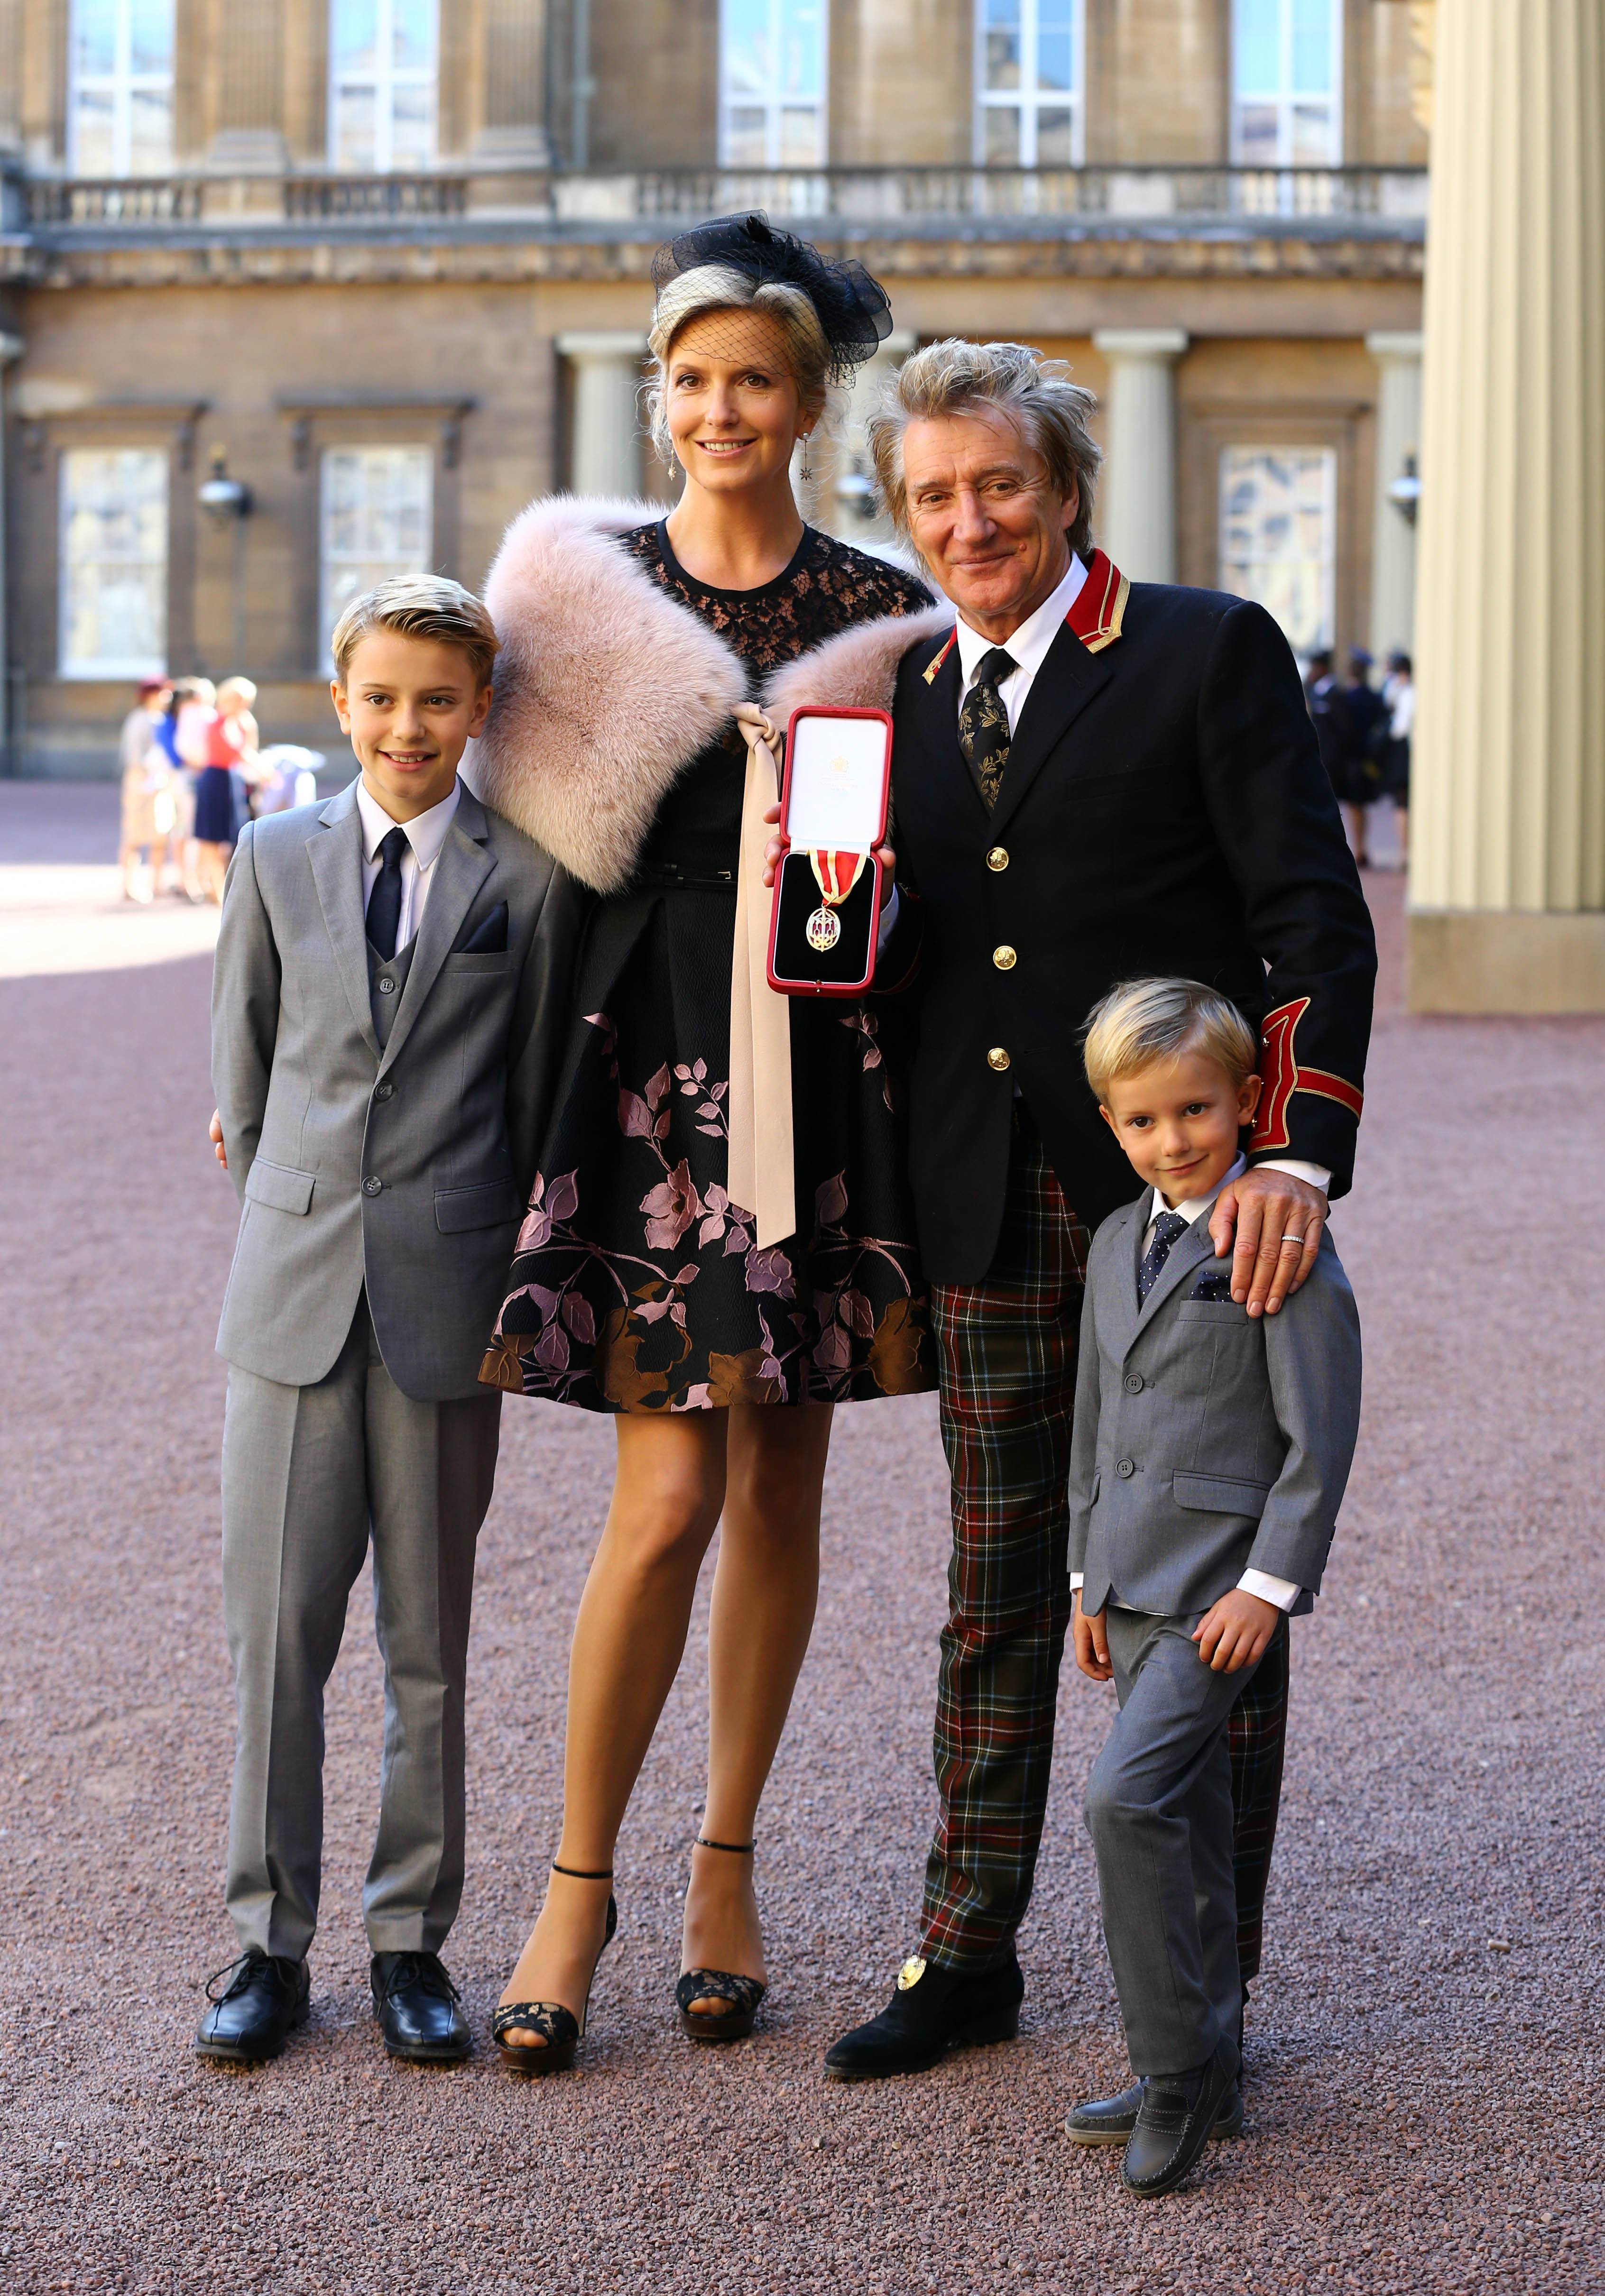 Rod Stewart Moved Wife & Little Sons to Rural Home for a Serene Life ...